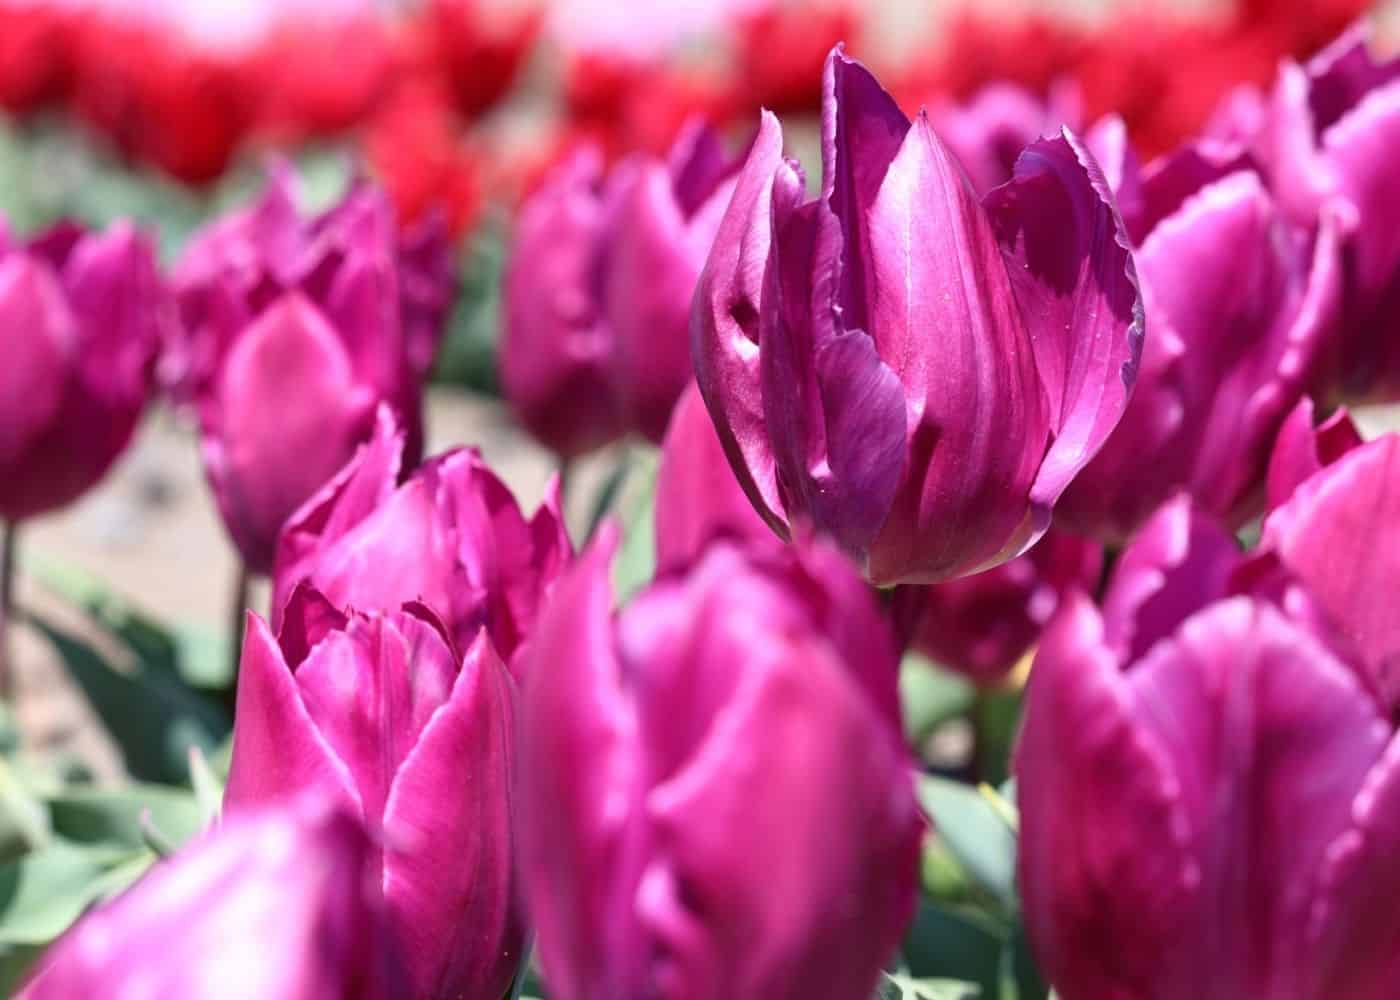 Types of tulips - single early - purple prince